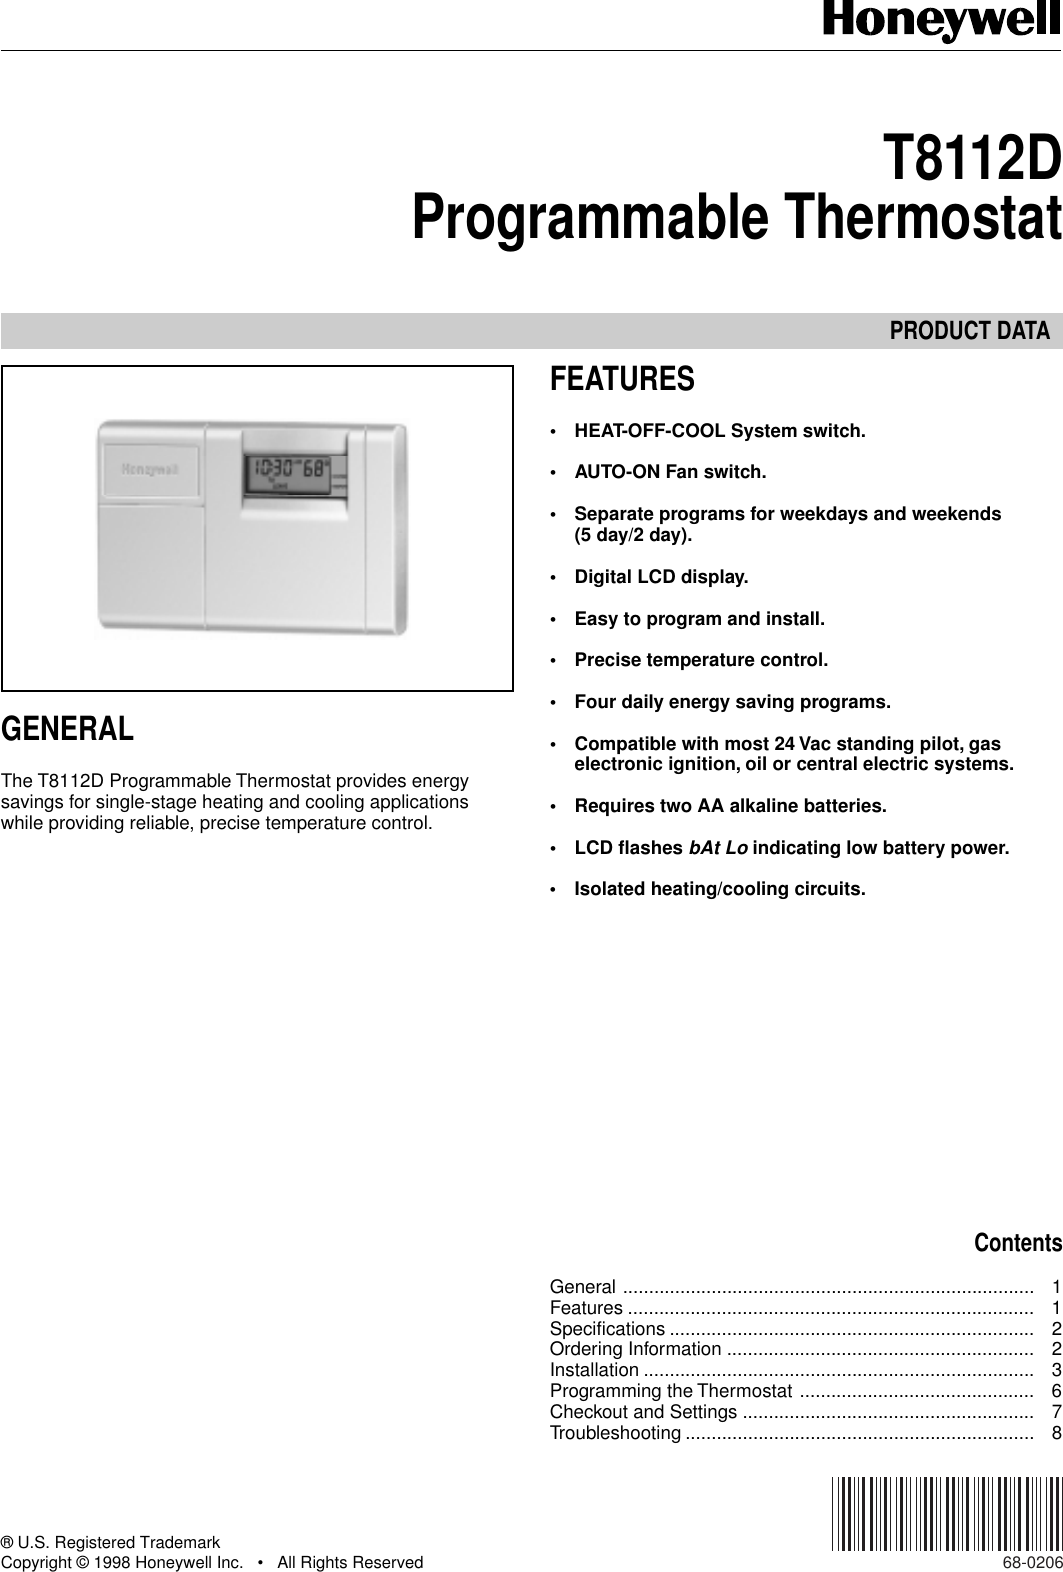 Page 1 of 8 - Honeywell Honeywell-Honeywell-Thermostat-T8112D-Users-Manual- 68-0170 - T8112 Programmable Thermostat  Honeywell-honeywell-thermostat-t8112d-users-manual